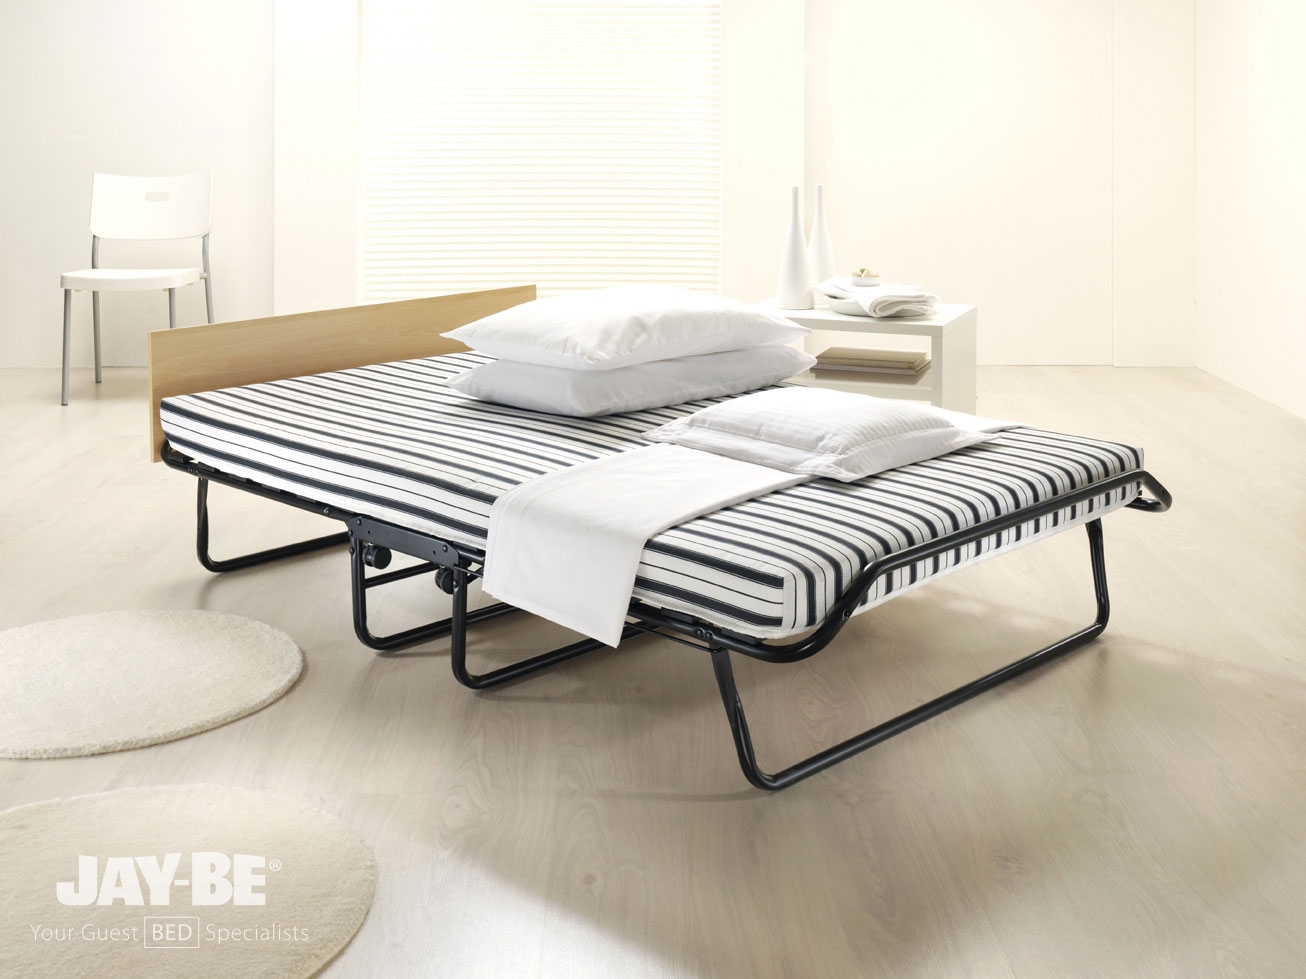 Jay-Be Jubilee Airflow Double Folding Bed with